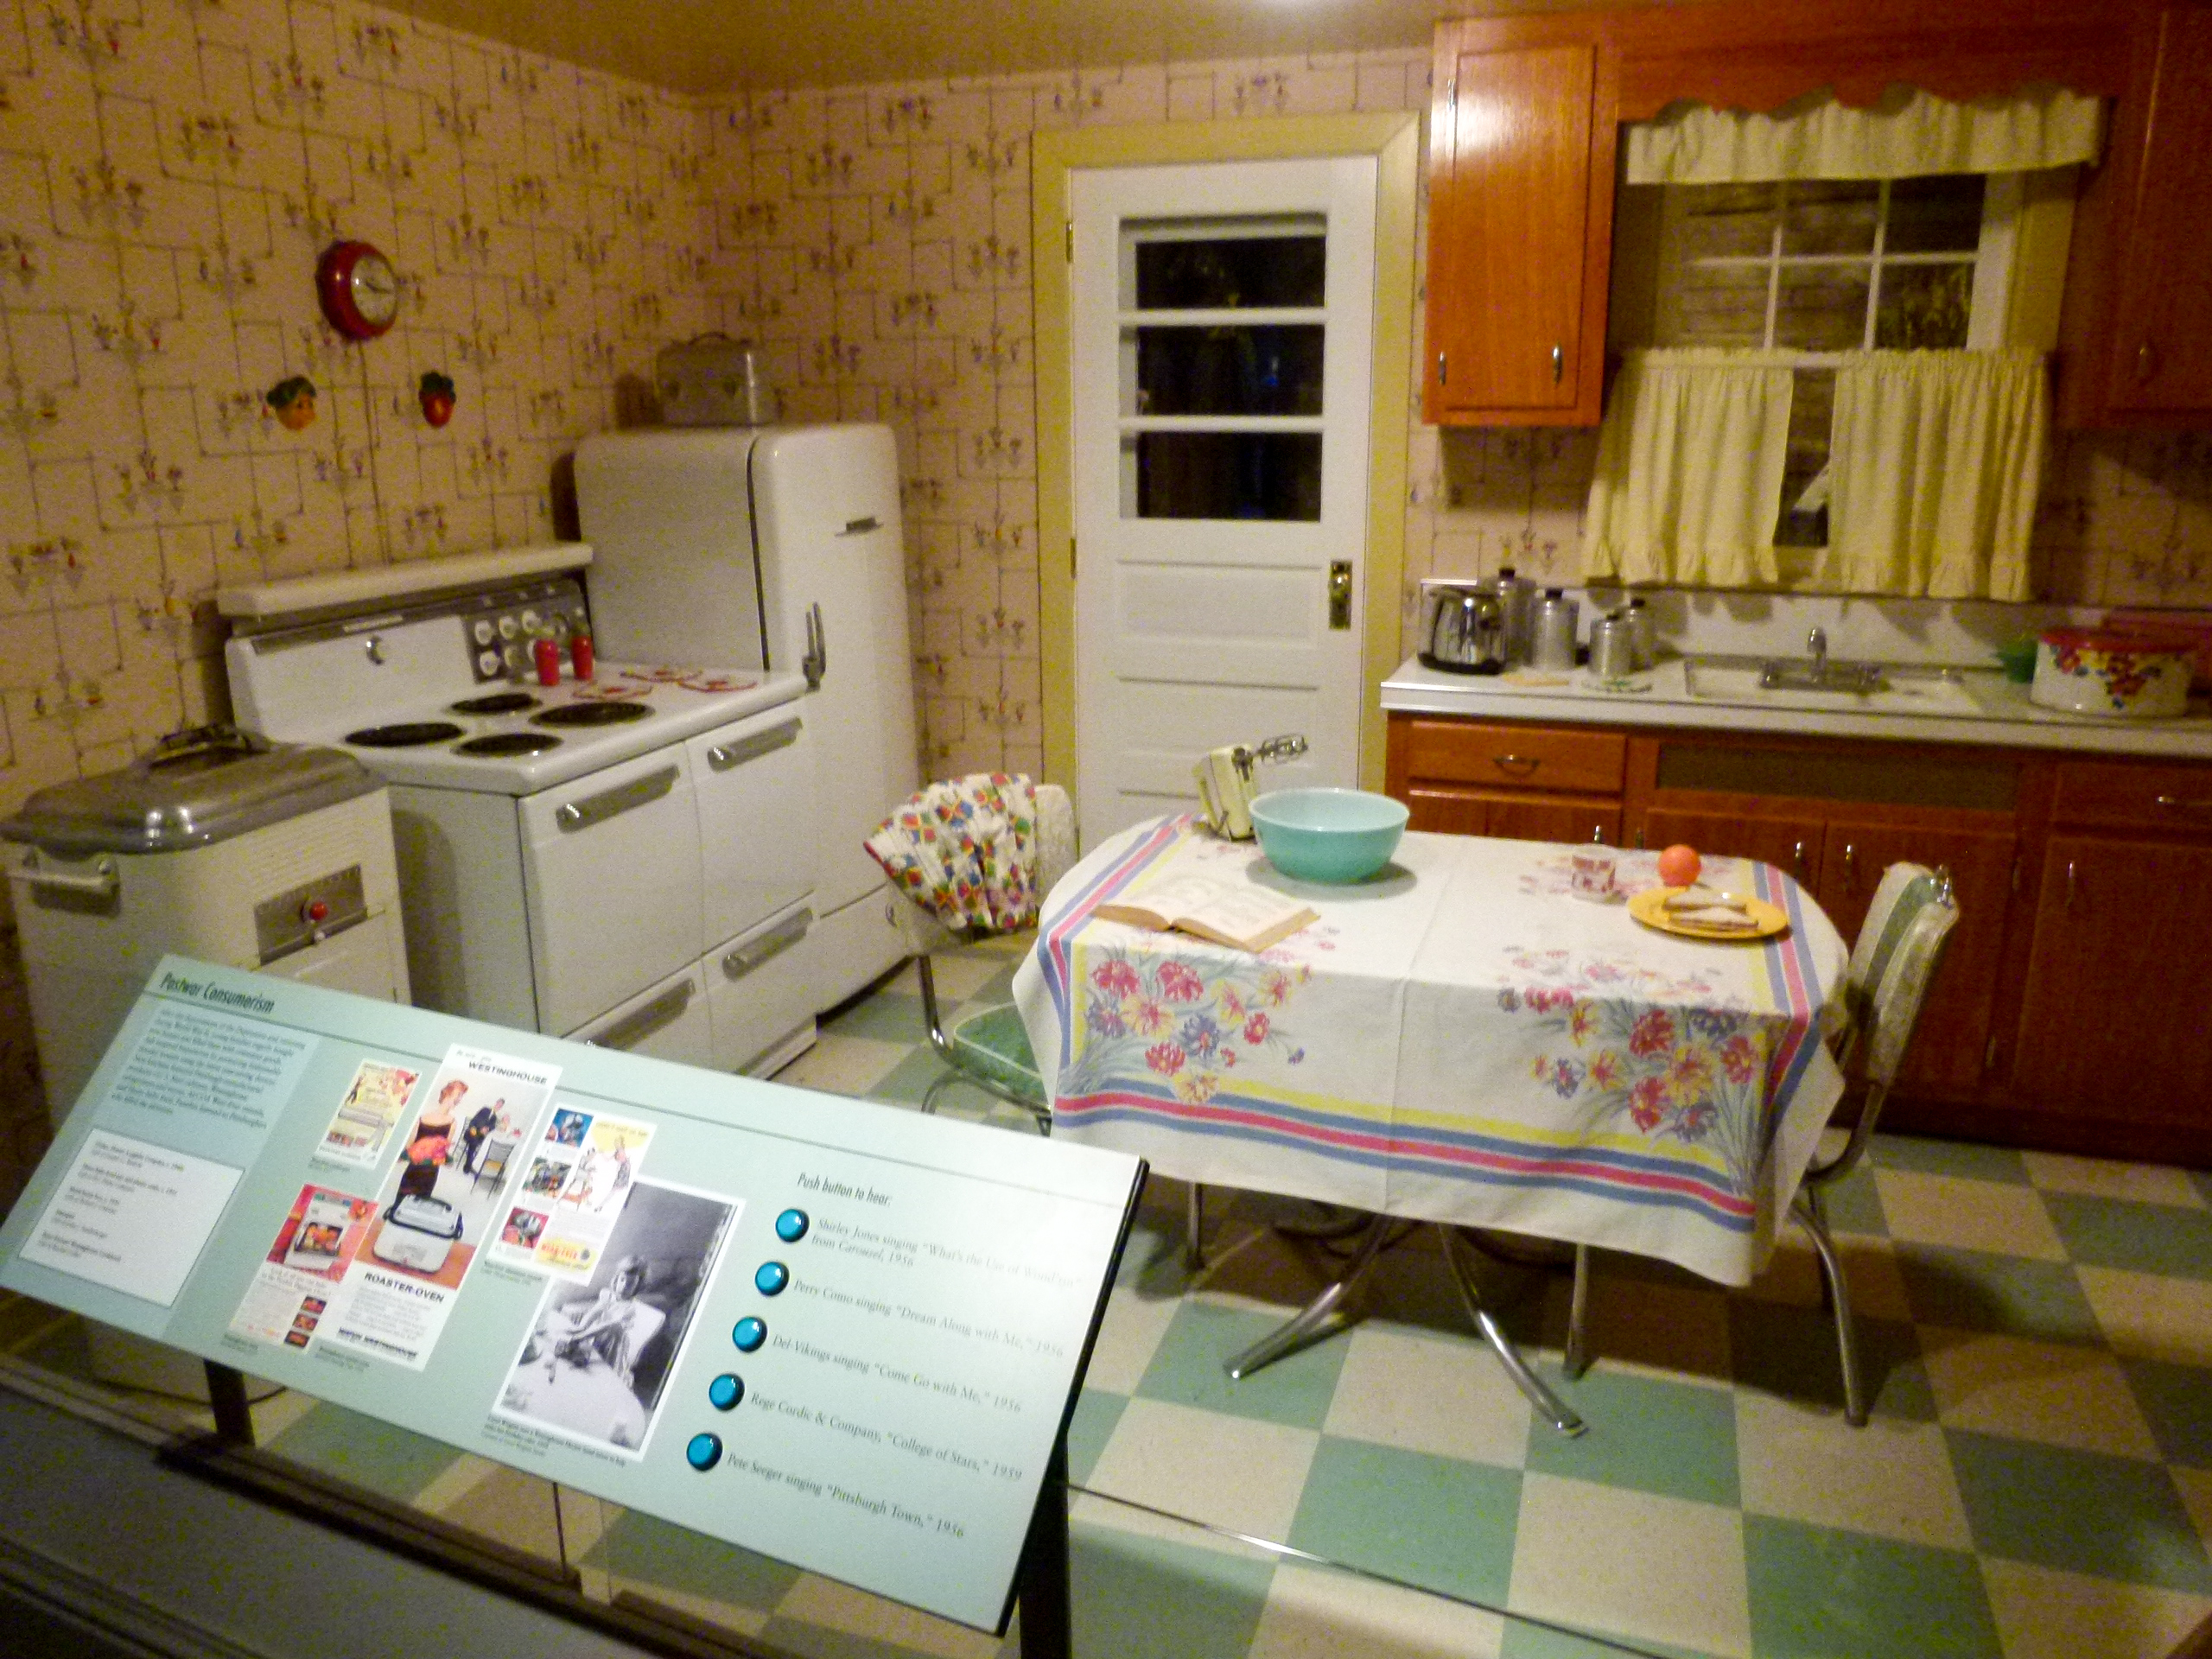 A Pittsburgh home of the 1950's with its "modern" appliances.